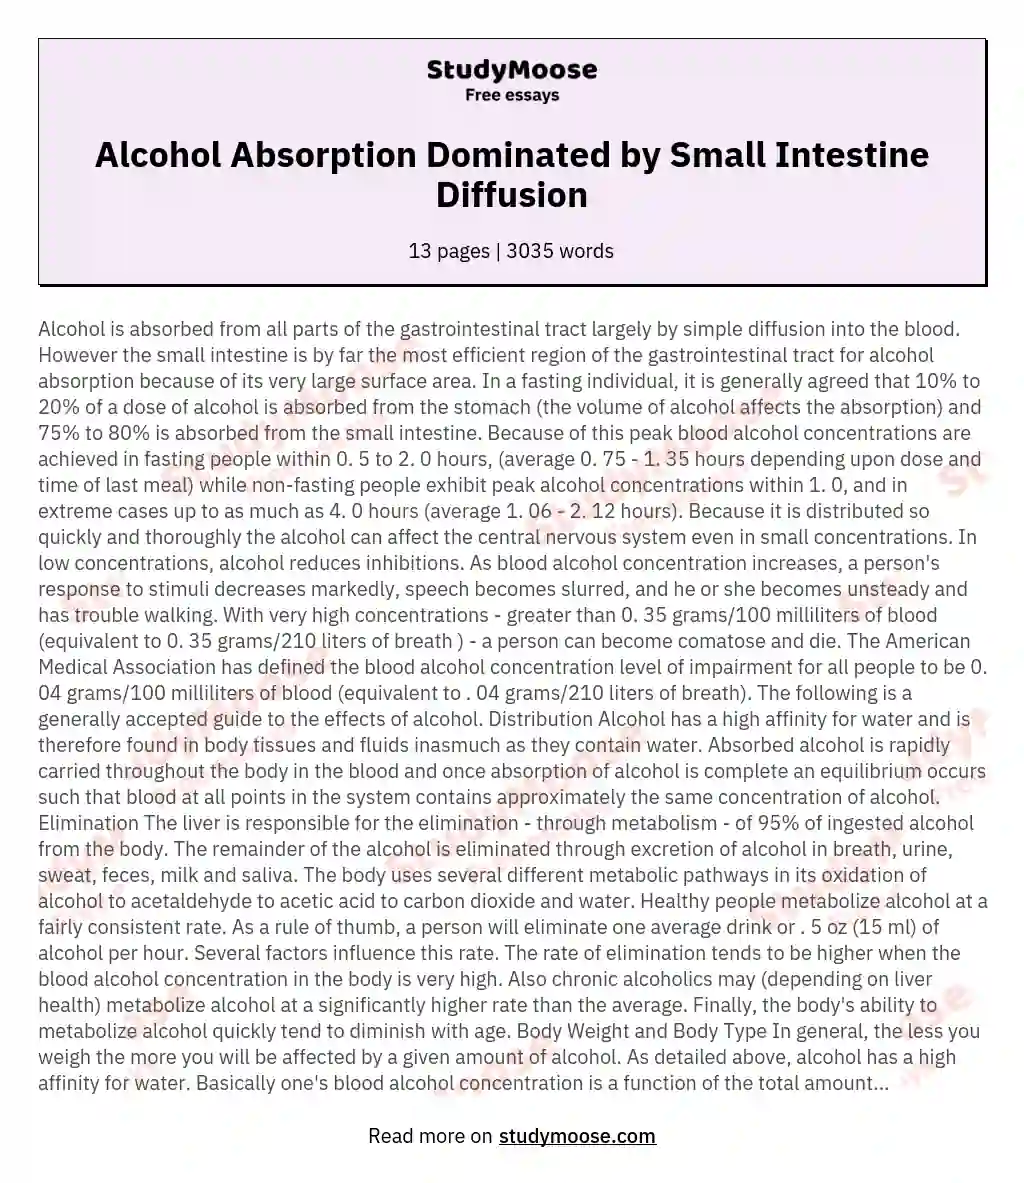 Alcohol Absorption Dominated by Small Intestine Diffusion essay